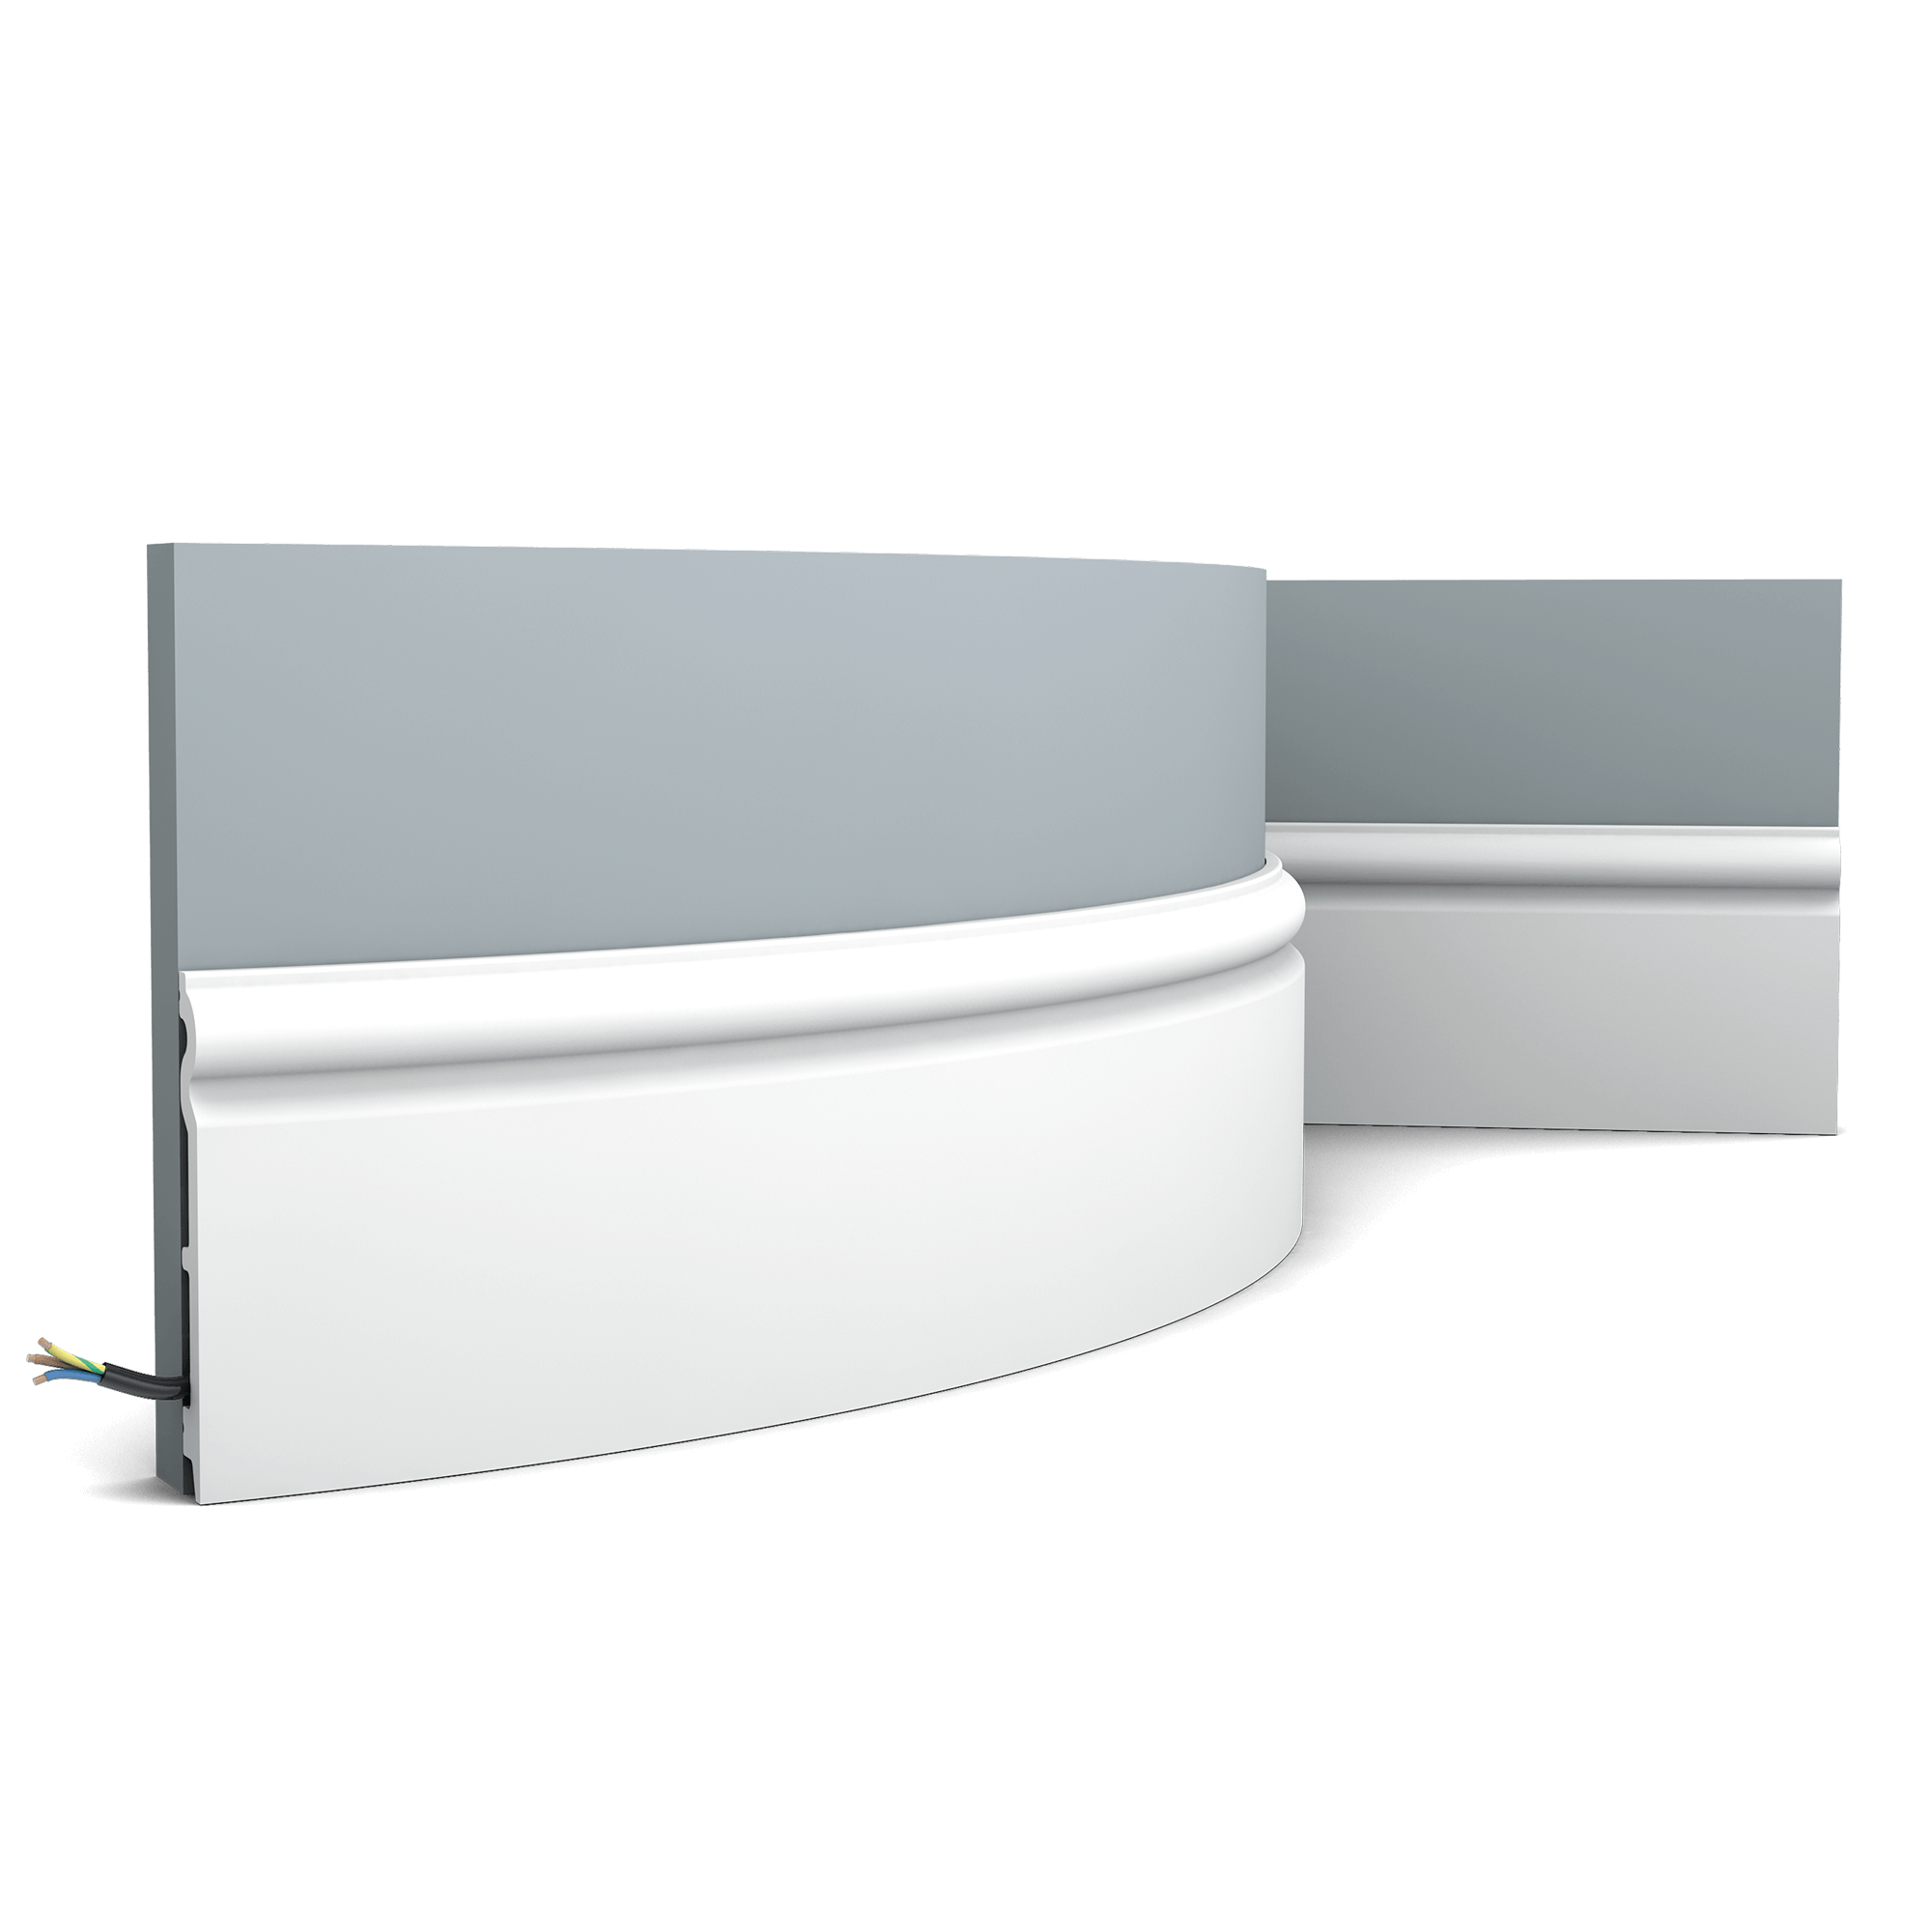 Flexible version of the SX138. This tall, rounded profile provides your wall with a classic finish. Thanks to its Flex technology, curved walls and surfaces are no problem. Installation remark: It is necessary to screw this profile on the wall. Flex Radius: R min = 40 cm